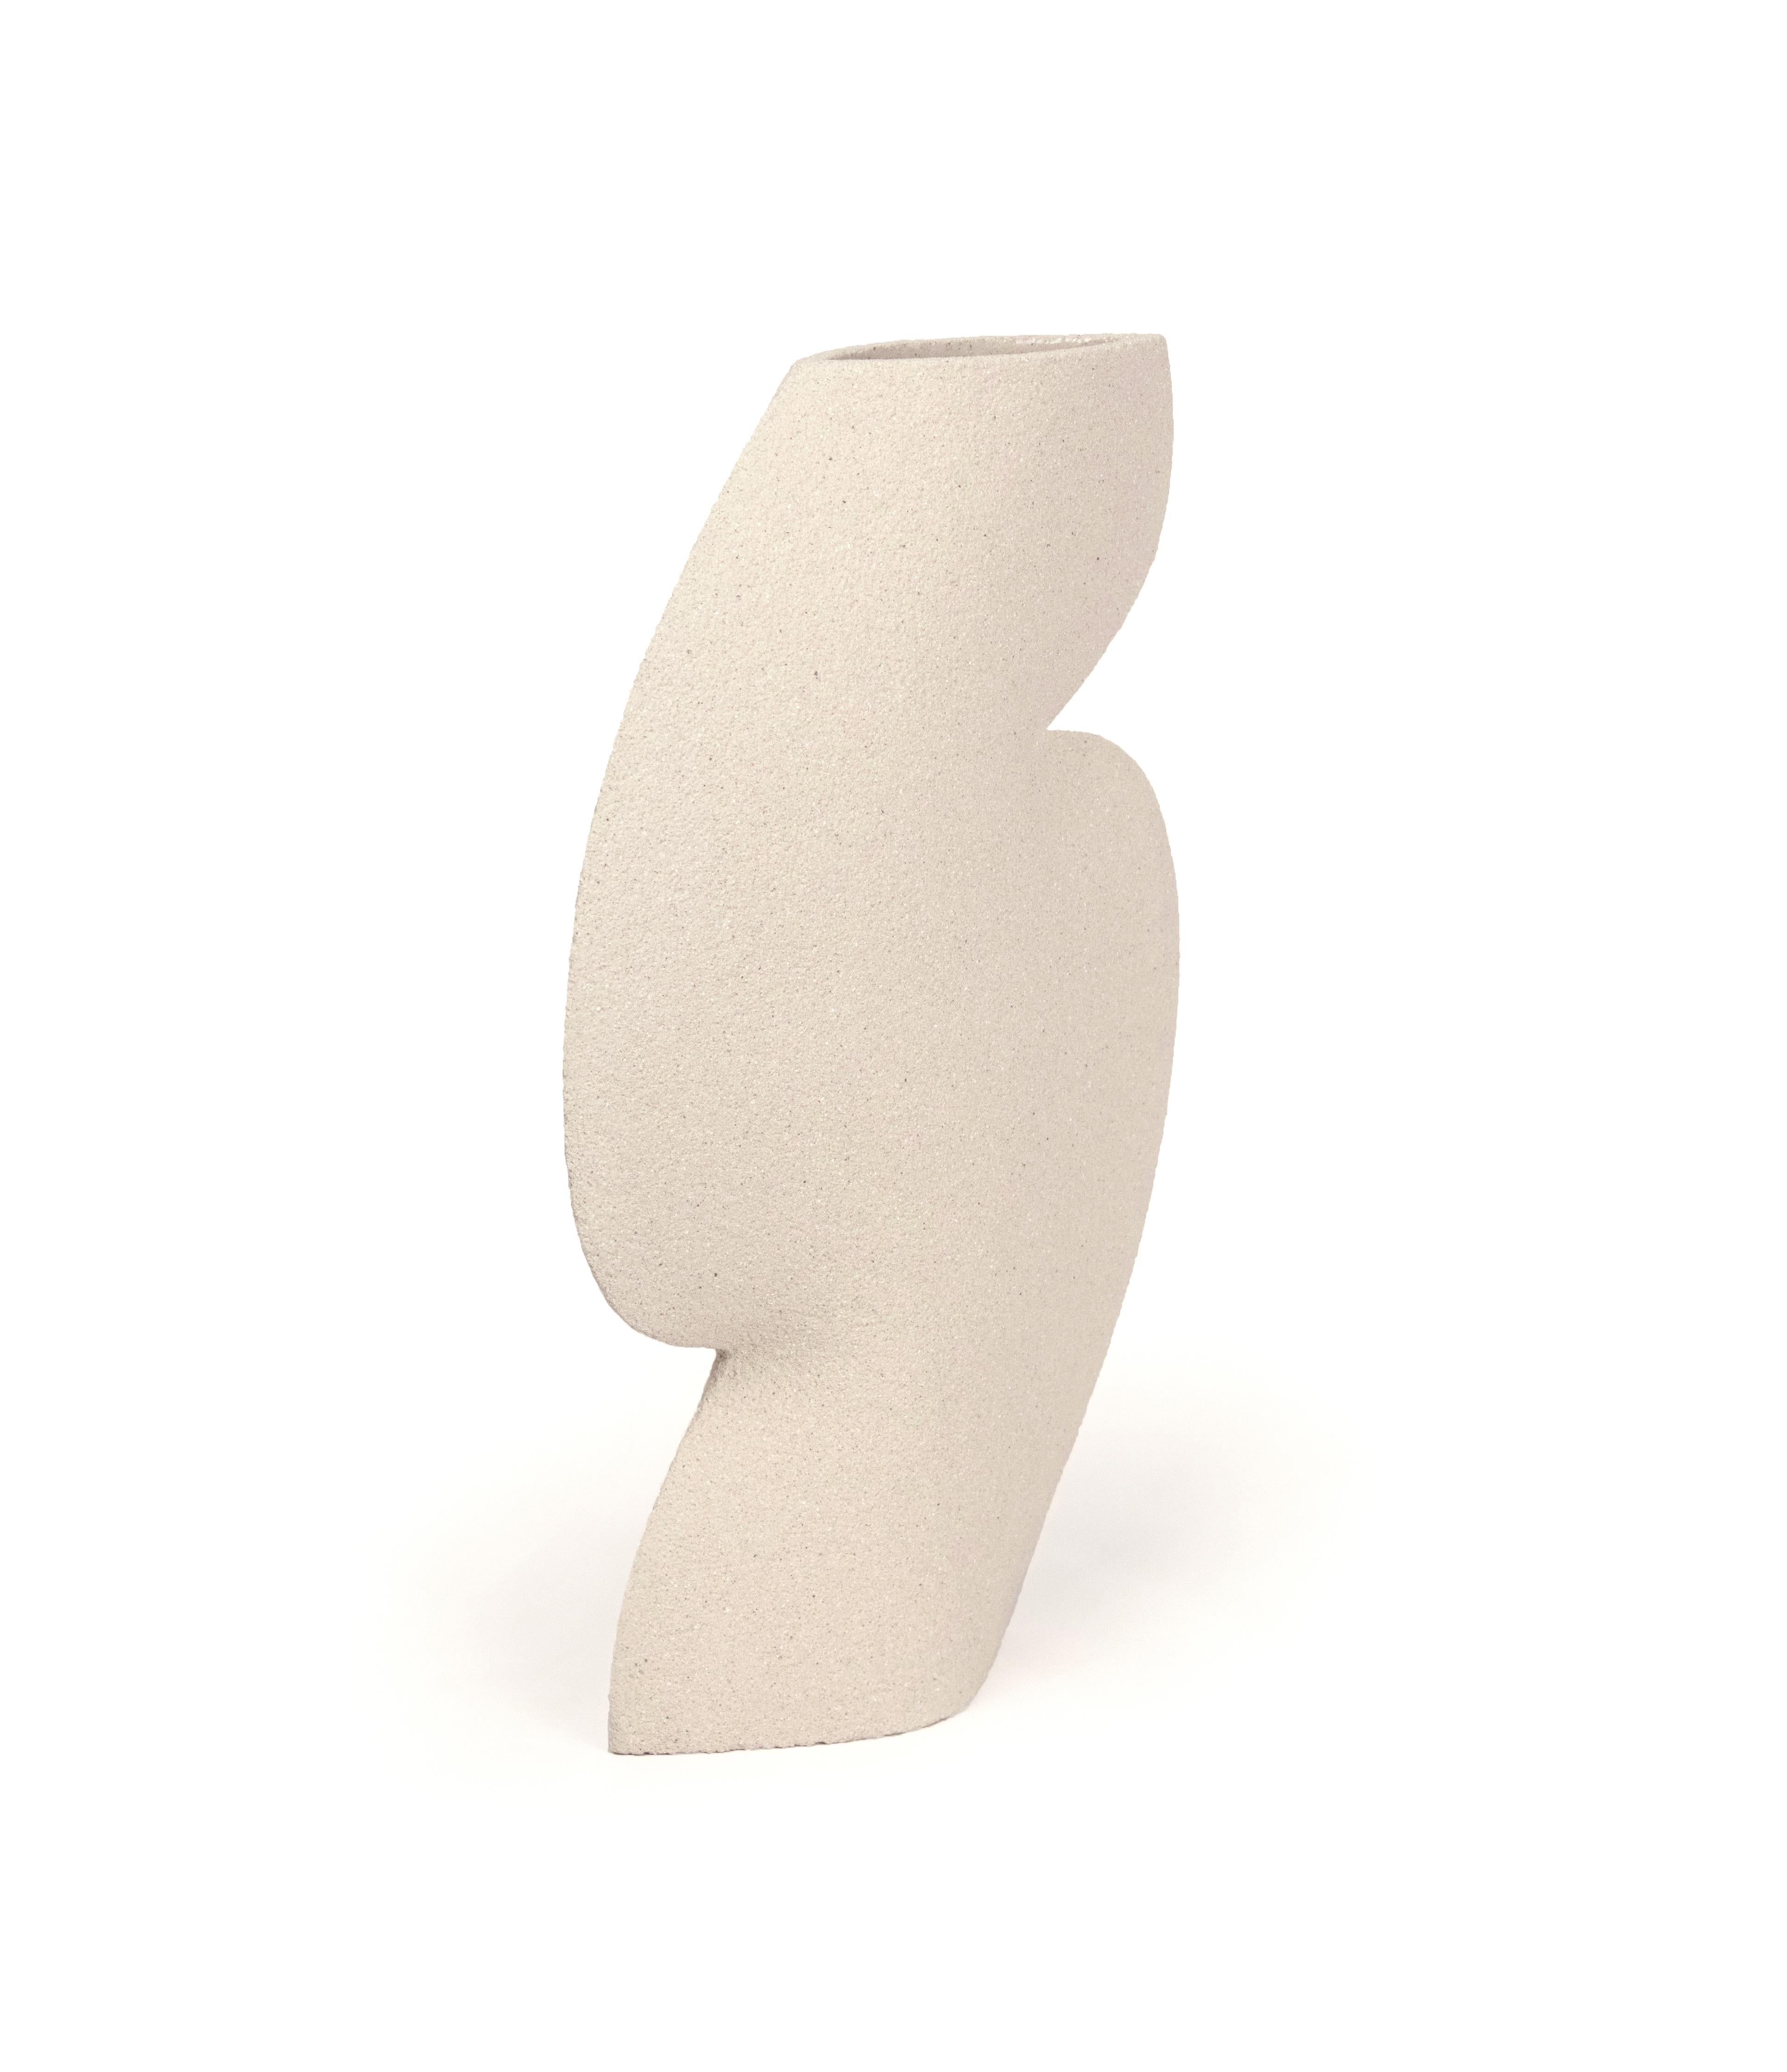 ELLIPSE N°3 - White

Measures: H: 25.5 cm / L: 17 cm
H: 10 Inch. / L: 6.6 Inch.

- Stoneware fired at high temperature finished with transparent glossy glaze inside.
- Raw exterior showcasing the natural aspect of the clay’s texture.
-